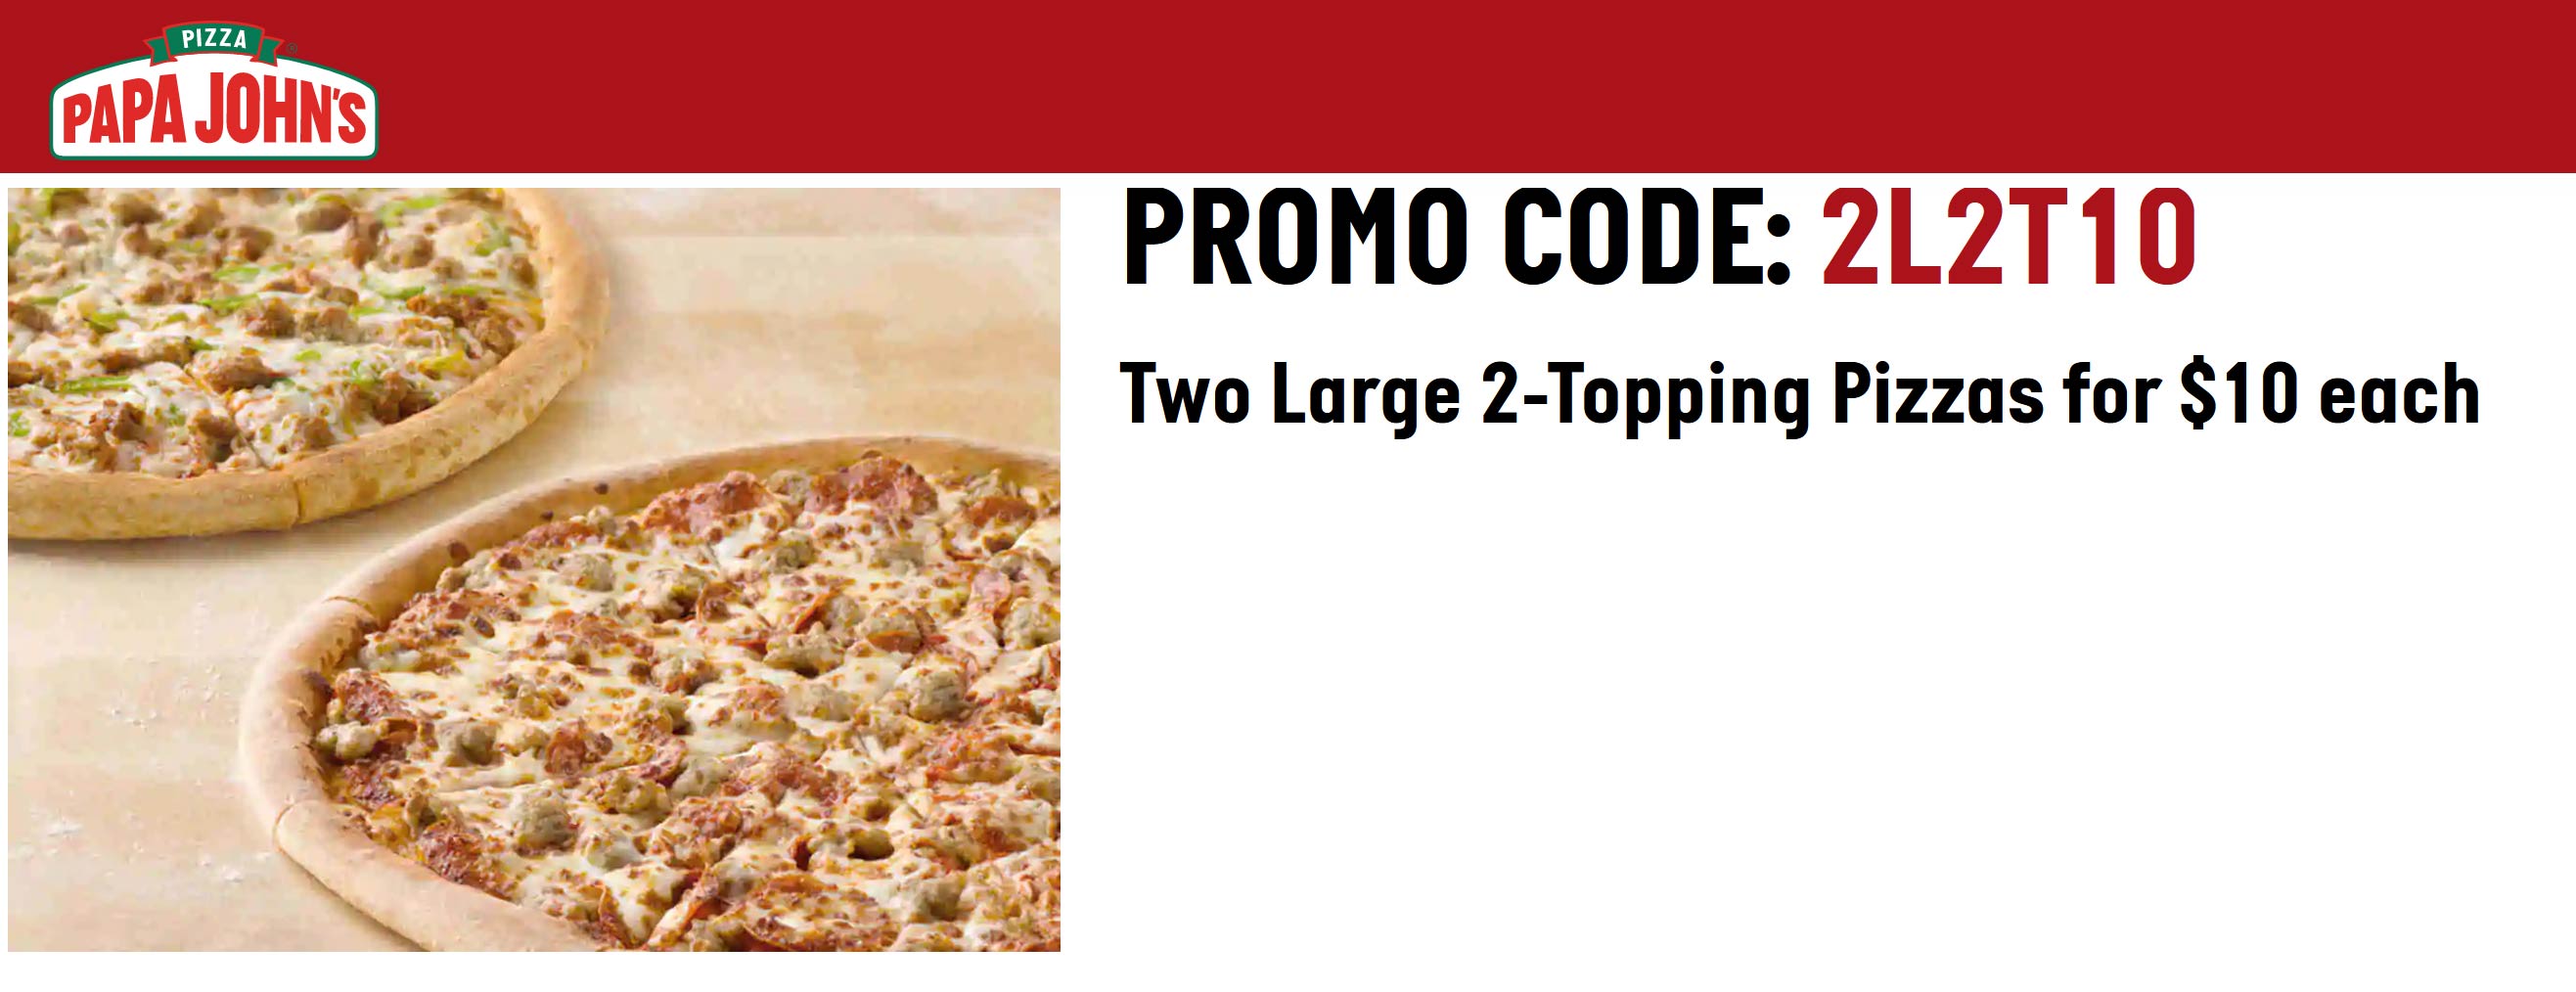 Papa Johns restaurants Coupon  2 large 2 topping pizzas = $20 at Papa Johns via promo code 2L2T10 also 25% off via 25OFF #papajohns 